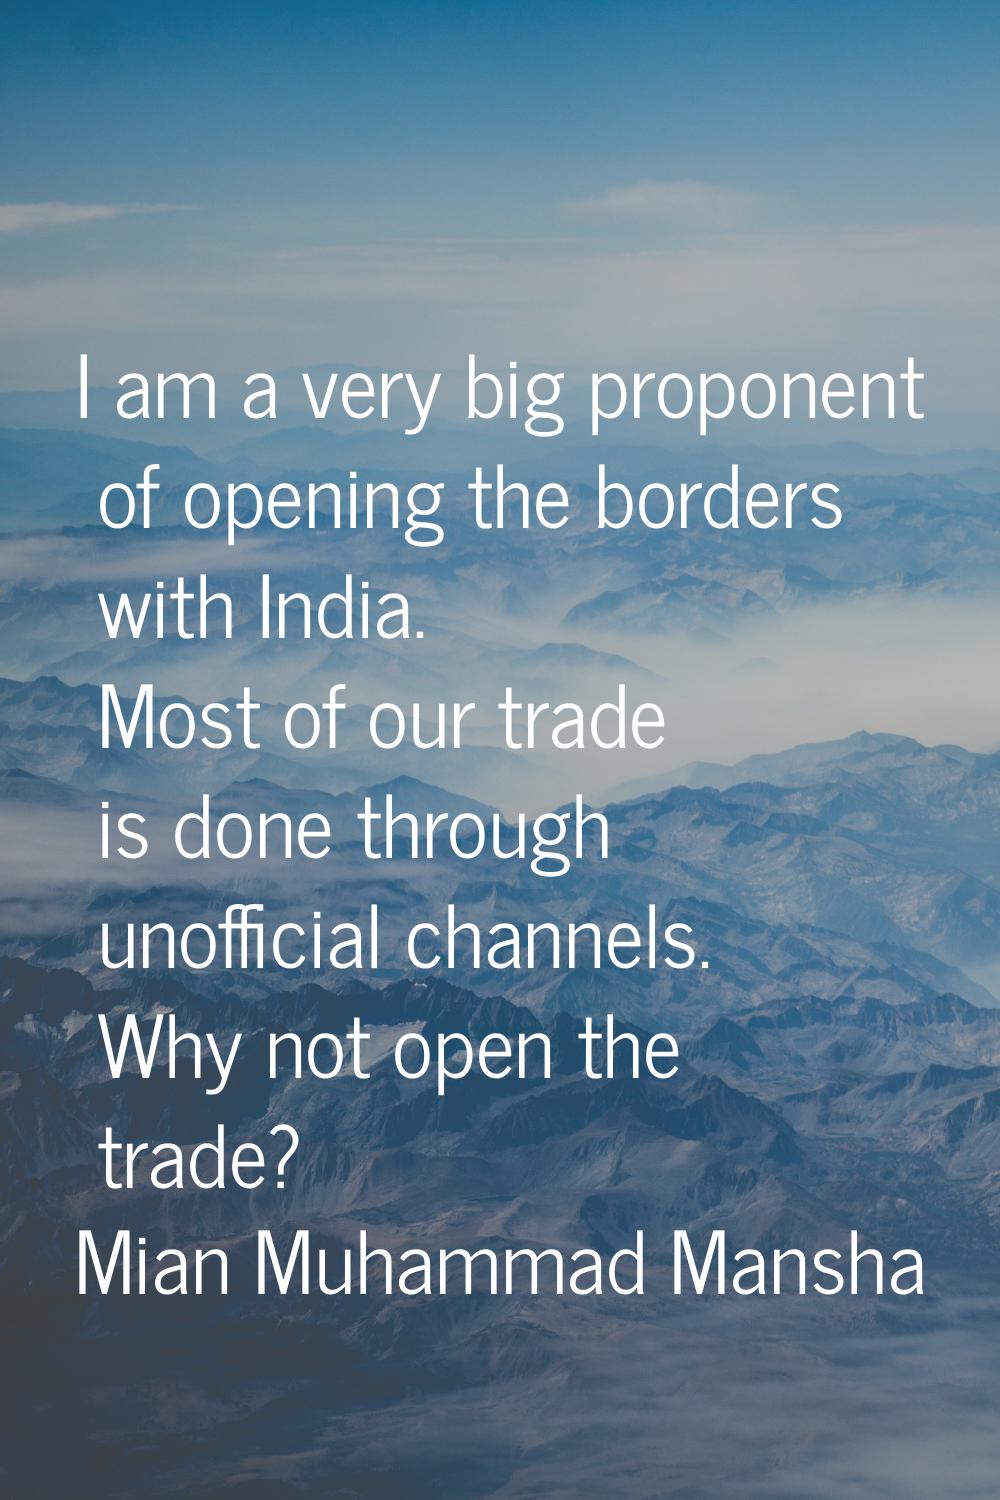 I am a very big proponent of opening the borders with India. Most of our trade is done through unof